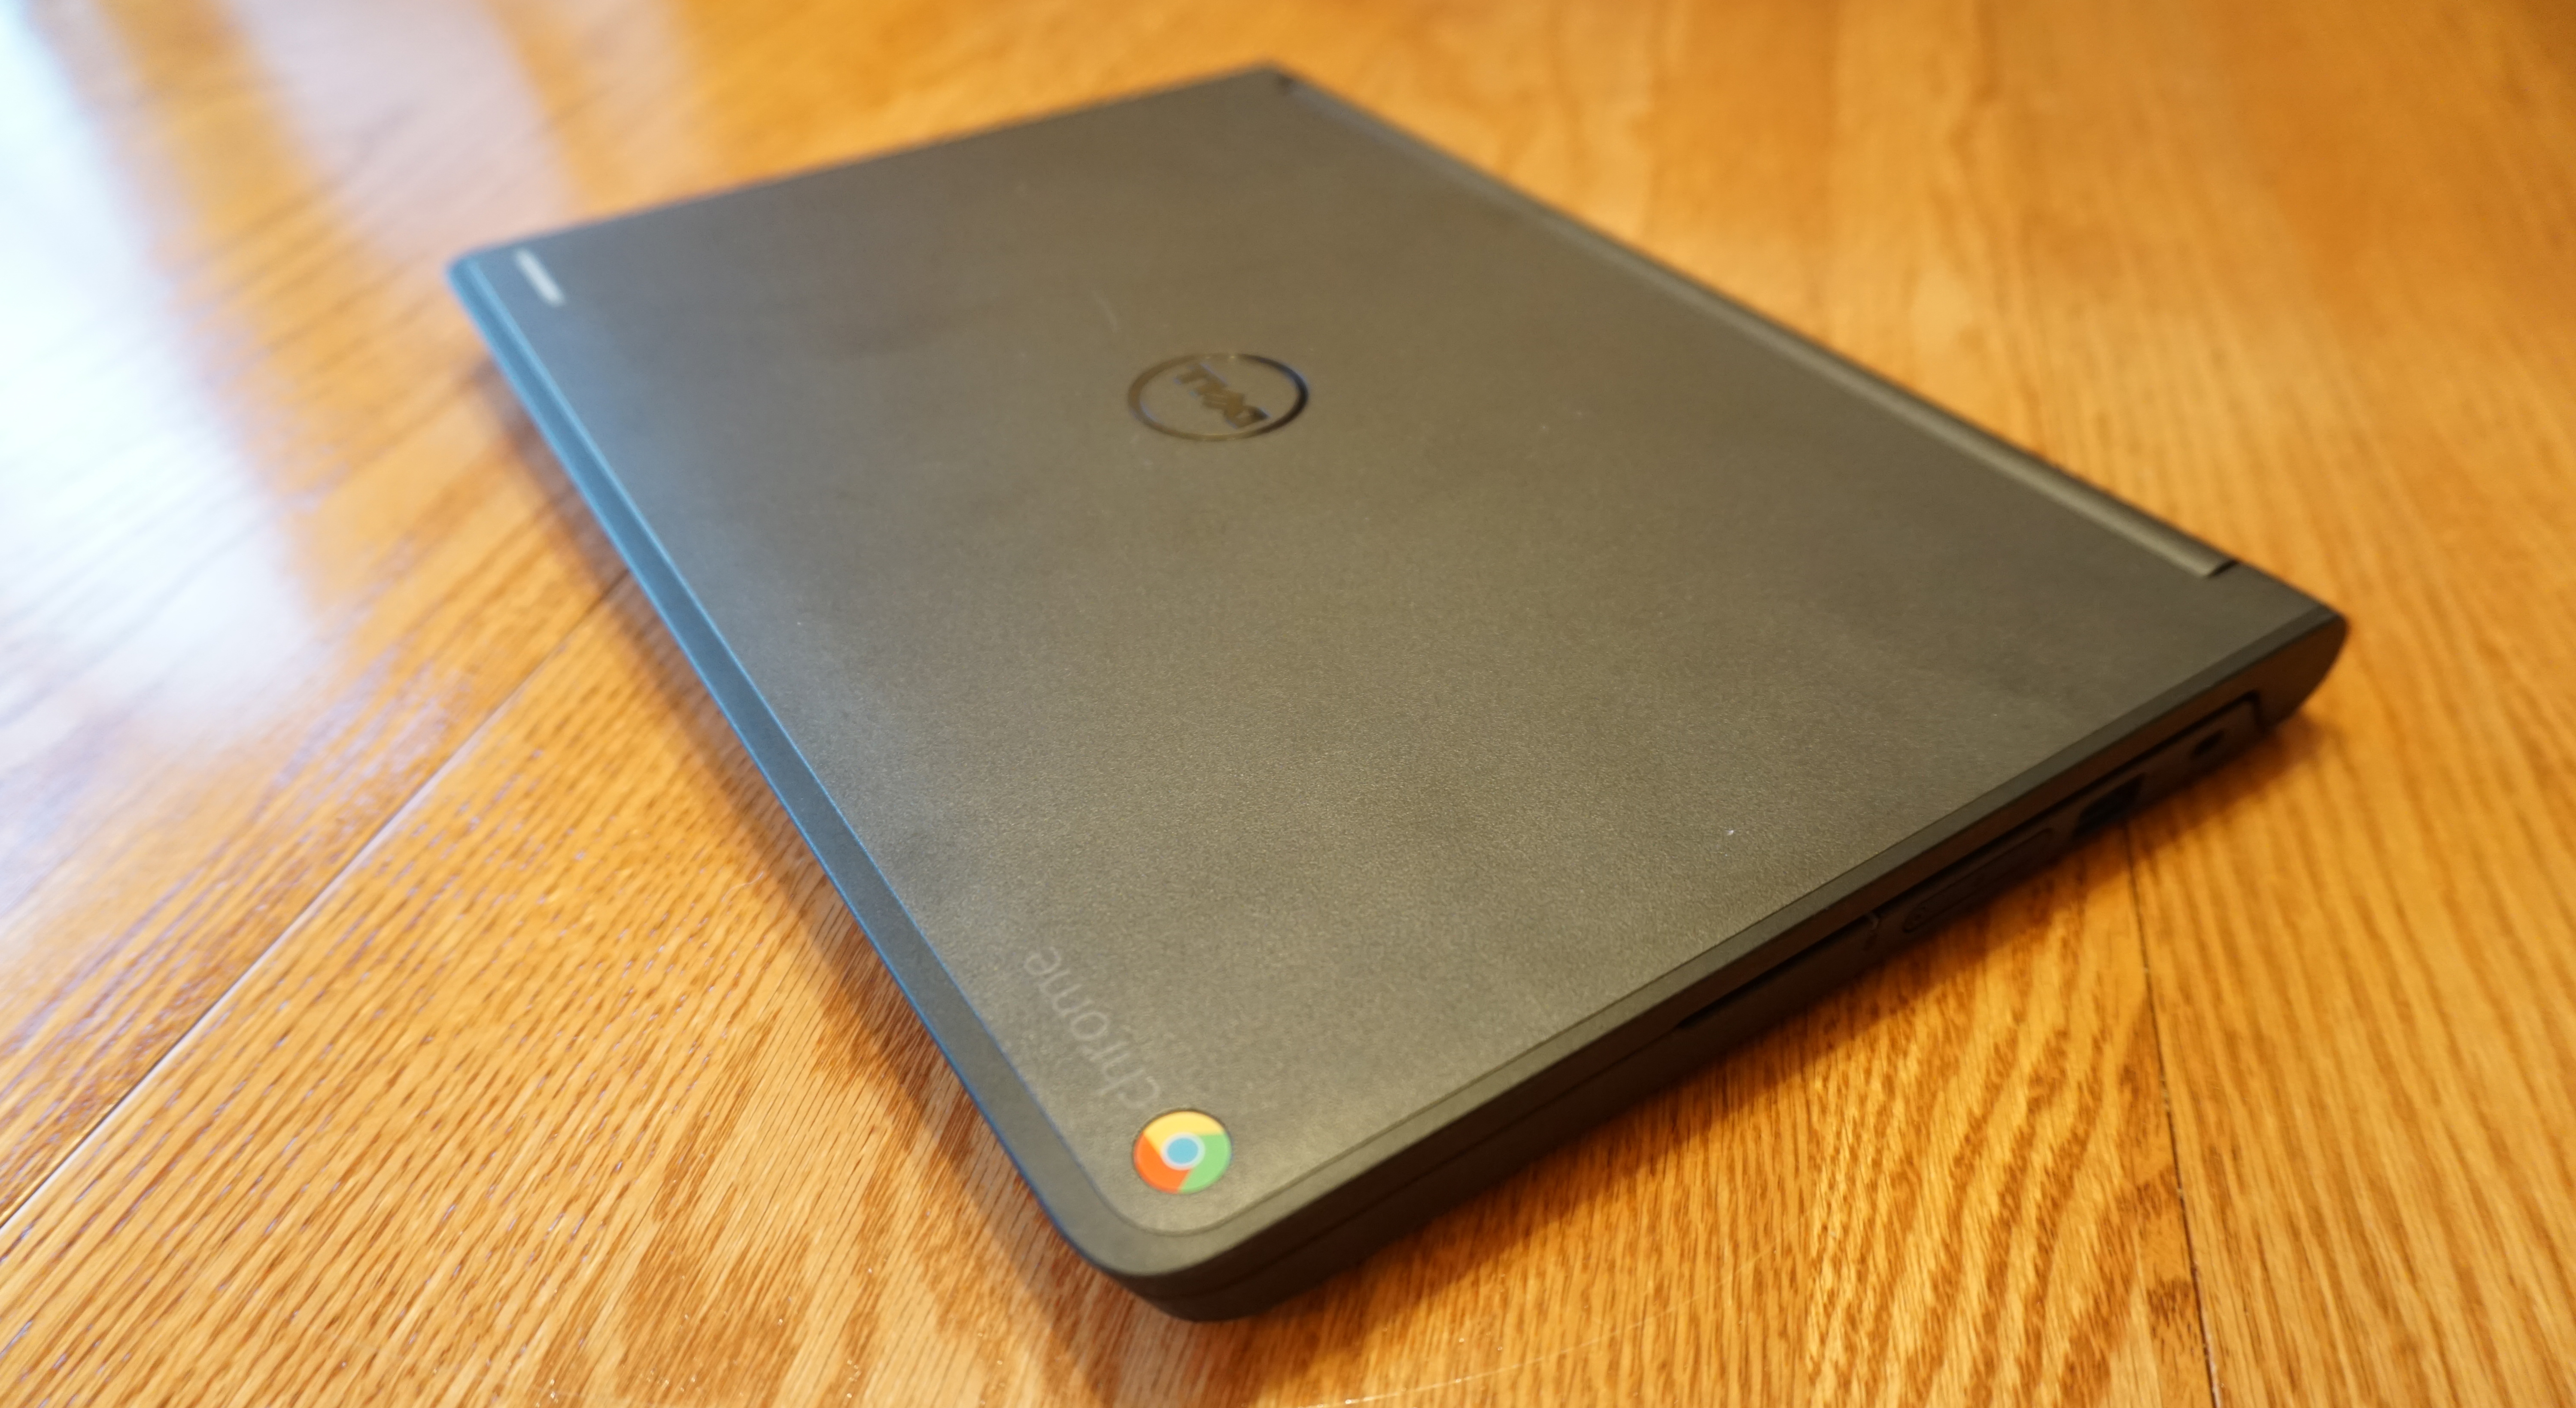 Final Words The Dell Chromebook 11 Touch Review